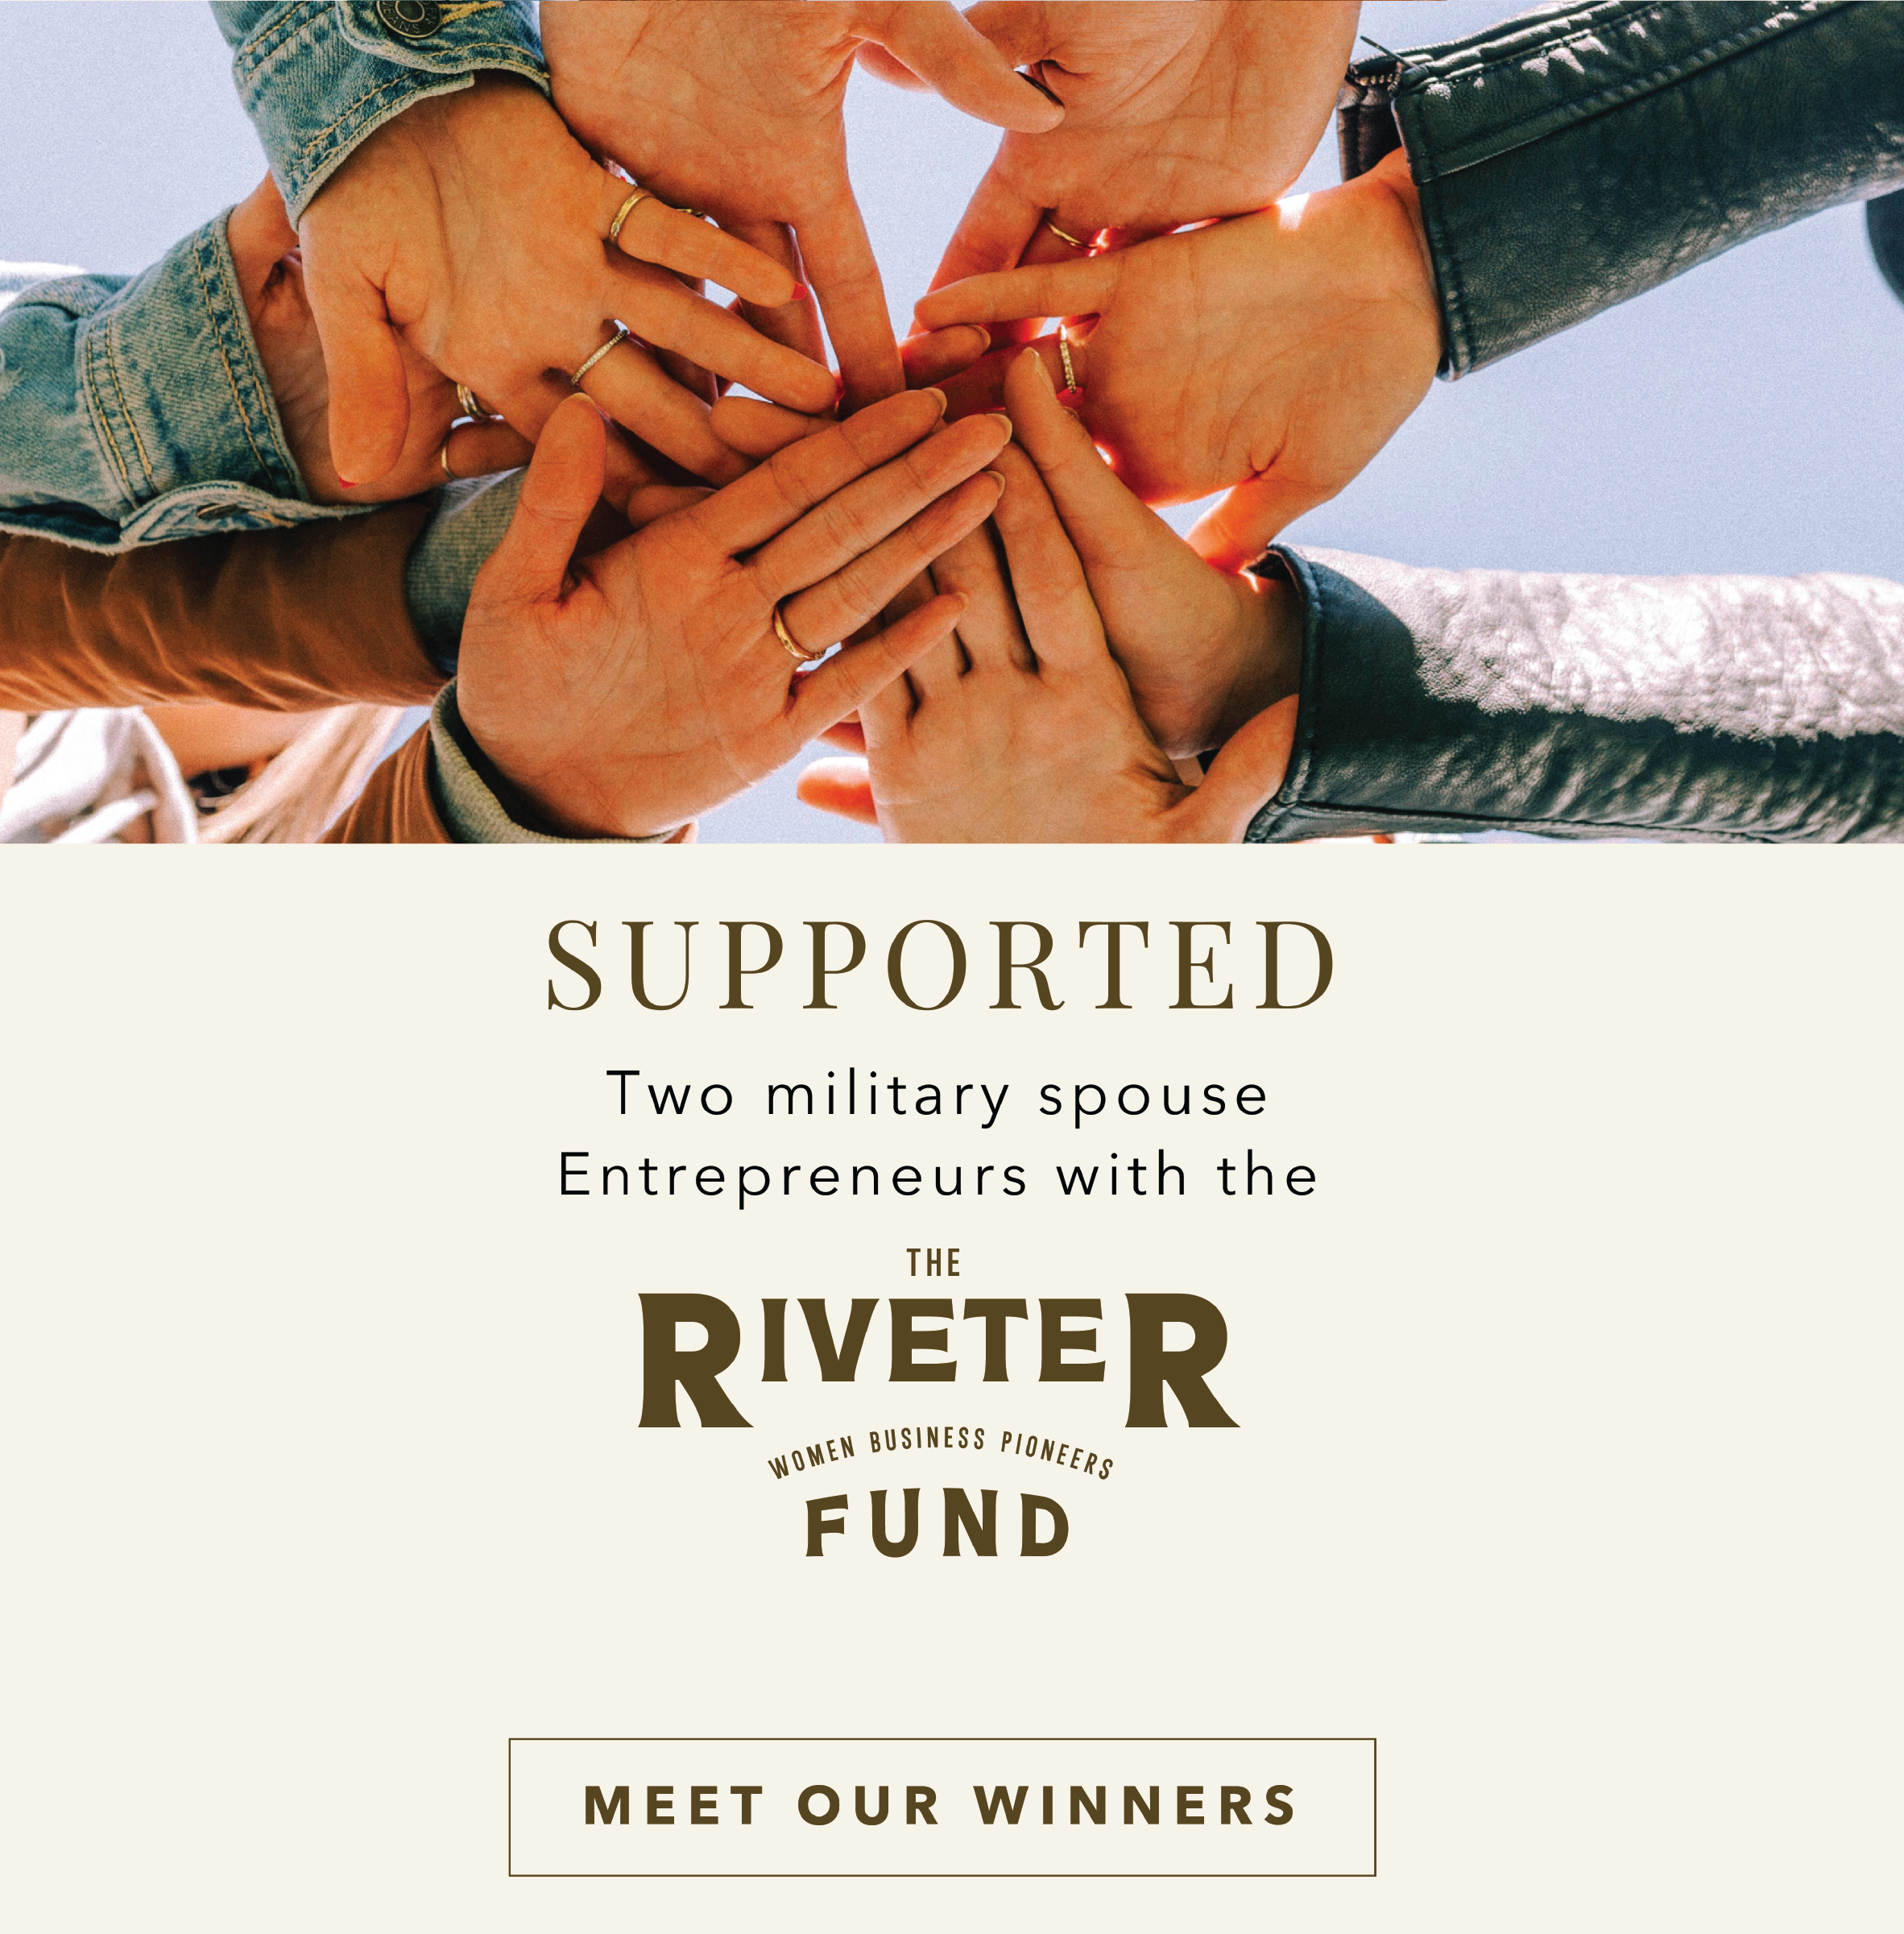 Supported two military spouse entrepreneurs through the Riveter fund 